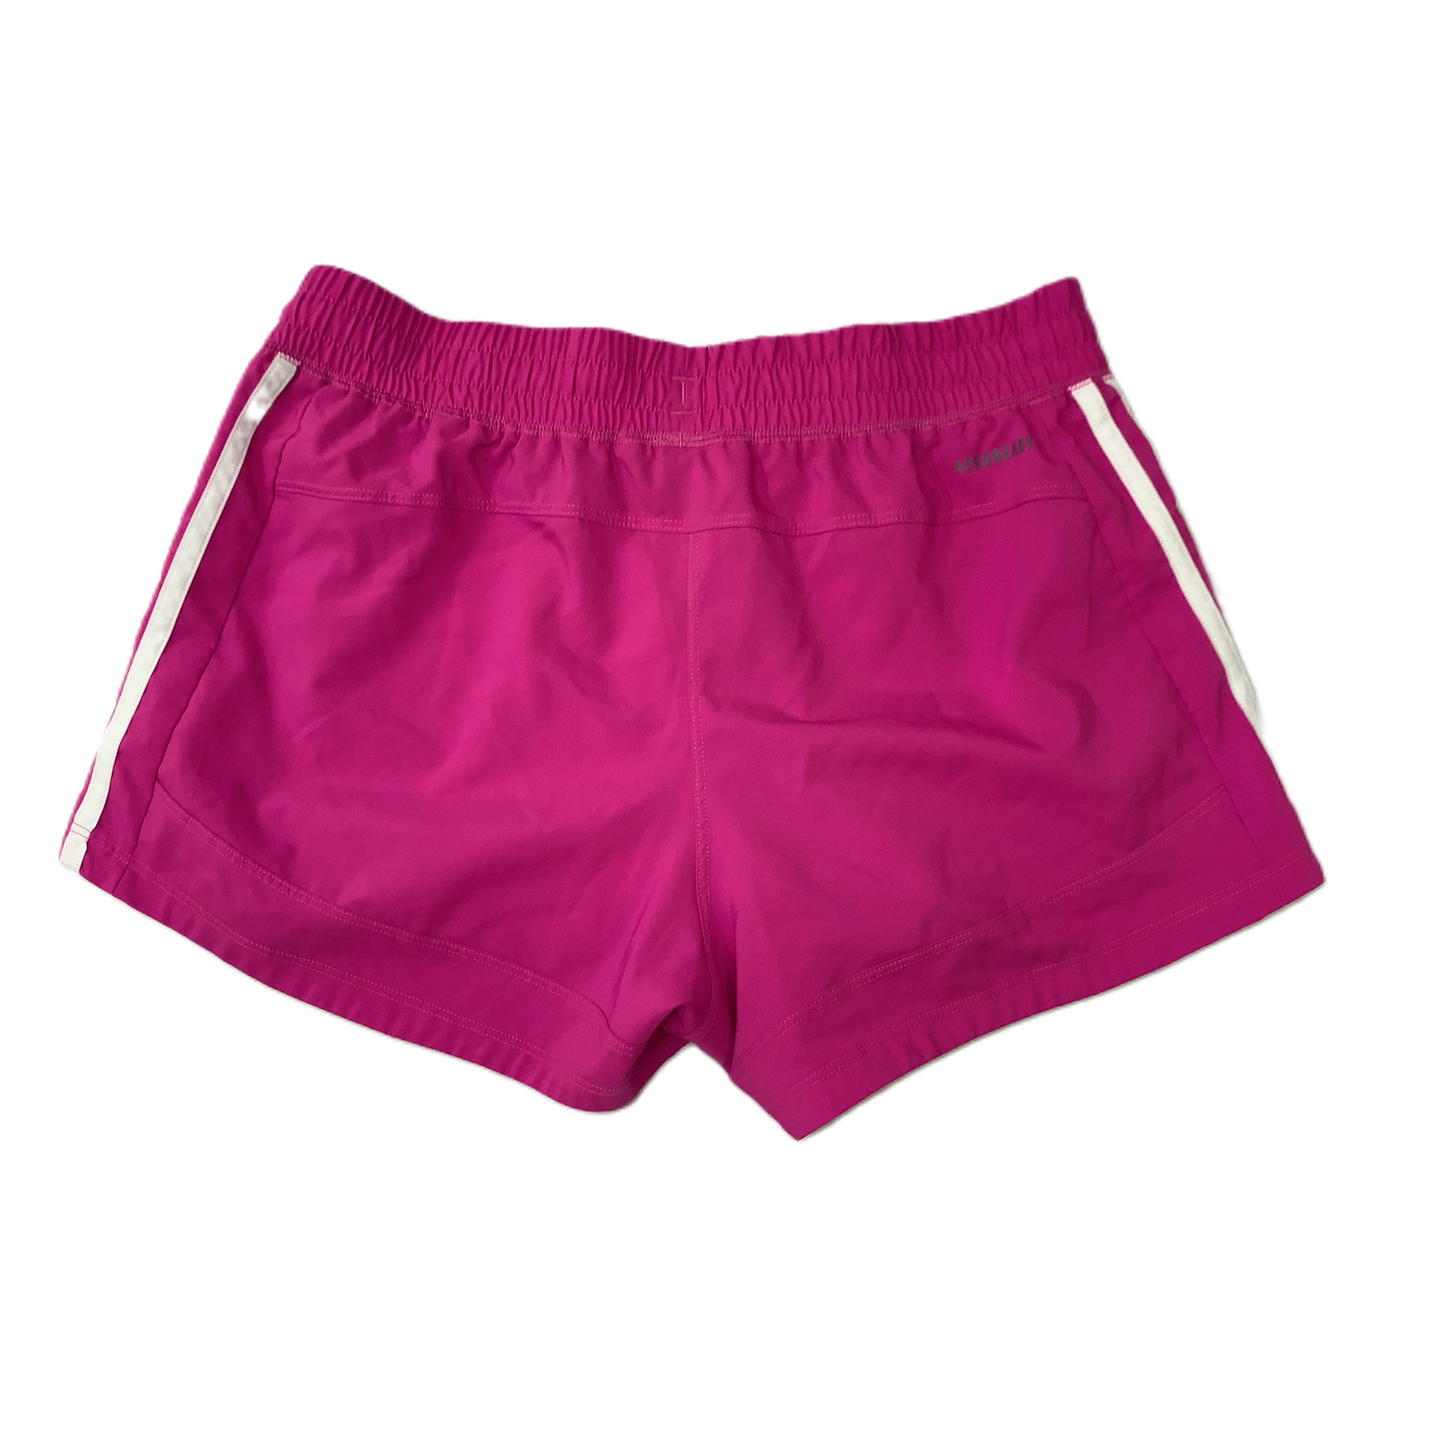 Pink  Athletic Shorts By Adidas  Size: S